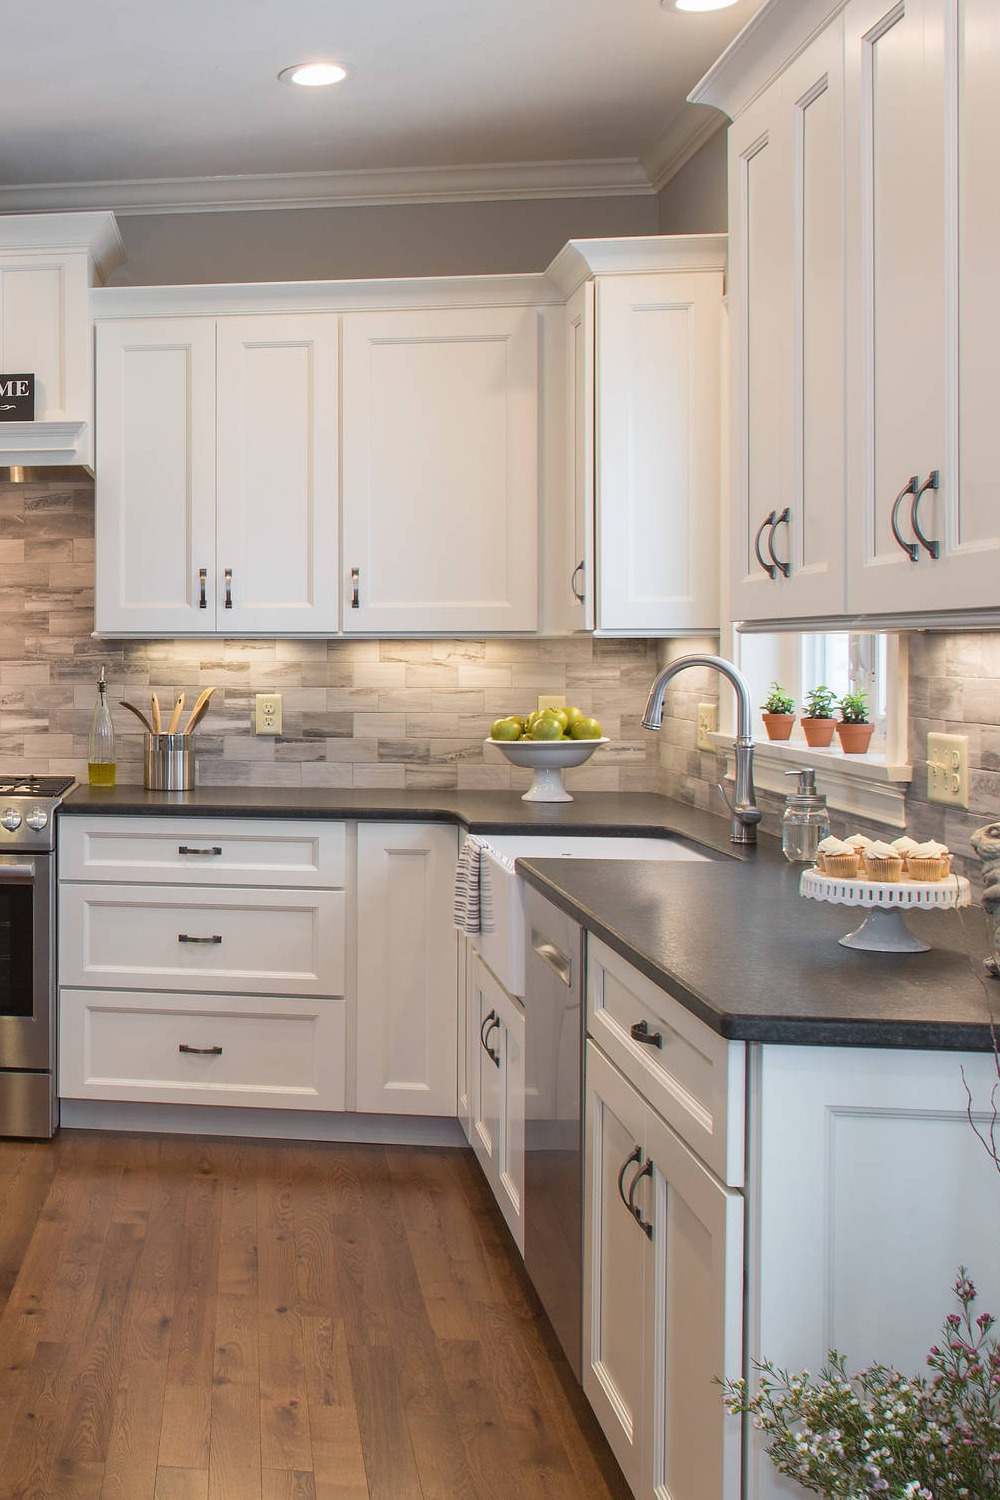 Choosing the Perfect Countertop for Your White Kitchen Cabinets